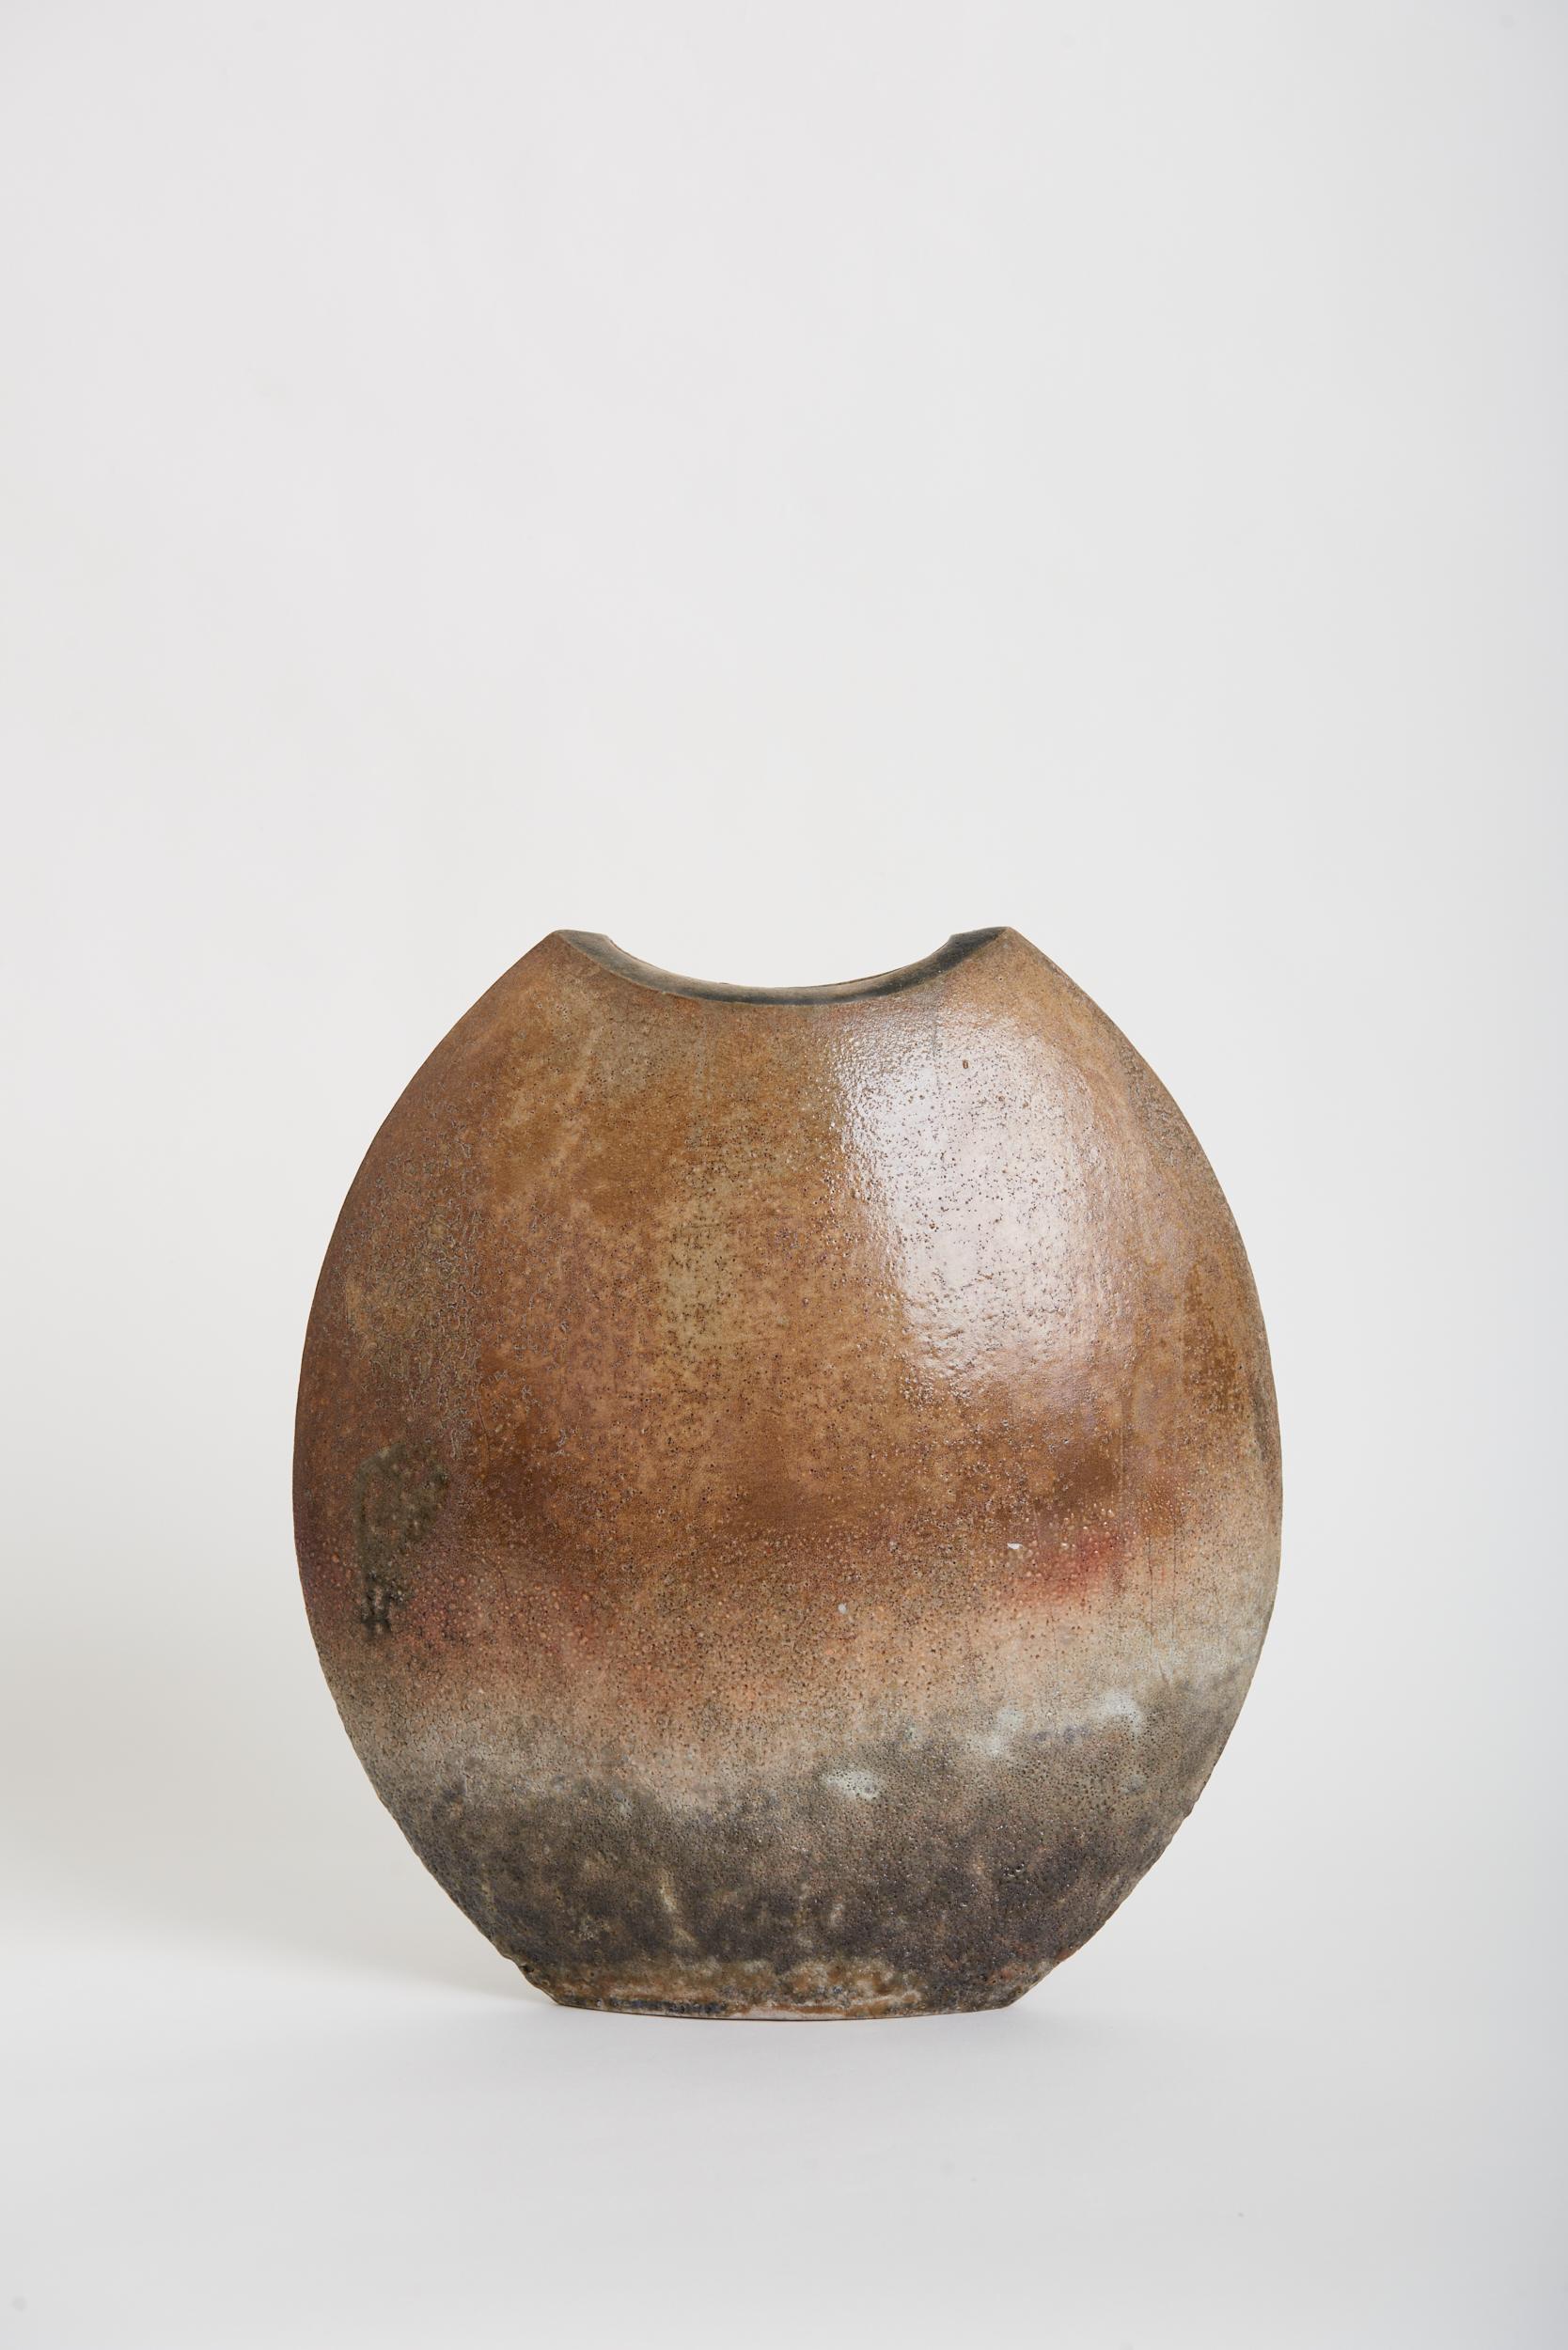 A large Studio Pottery smoked stoneware vase.
Signed, undeciphered.
Second half of the 20th century.